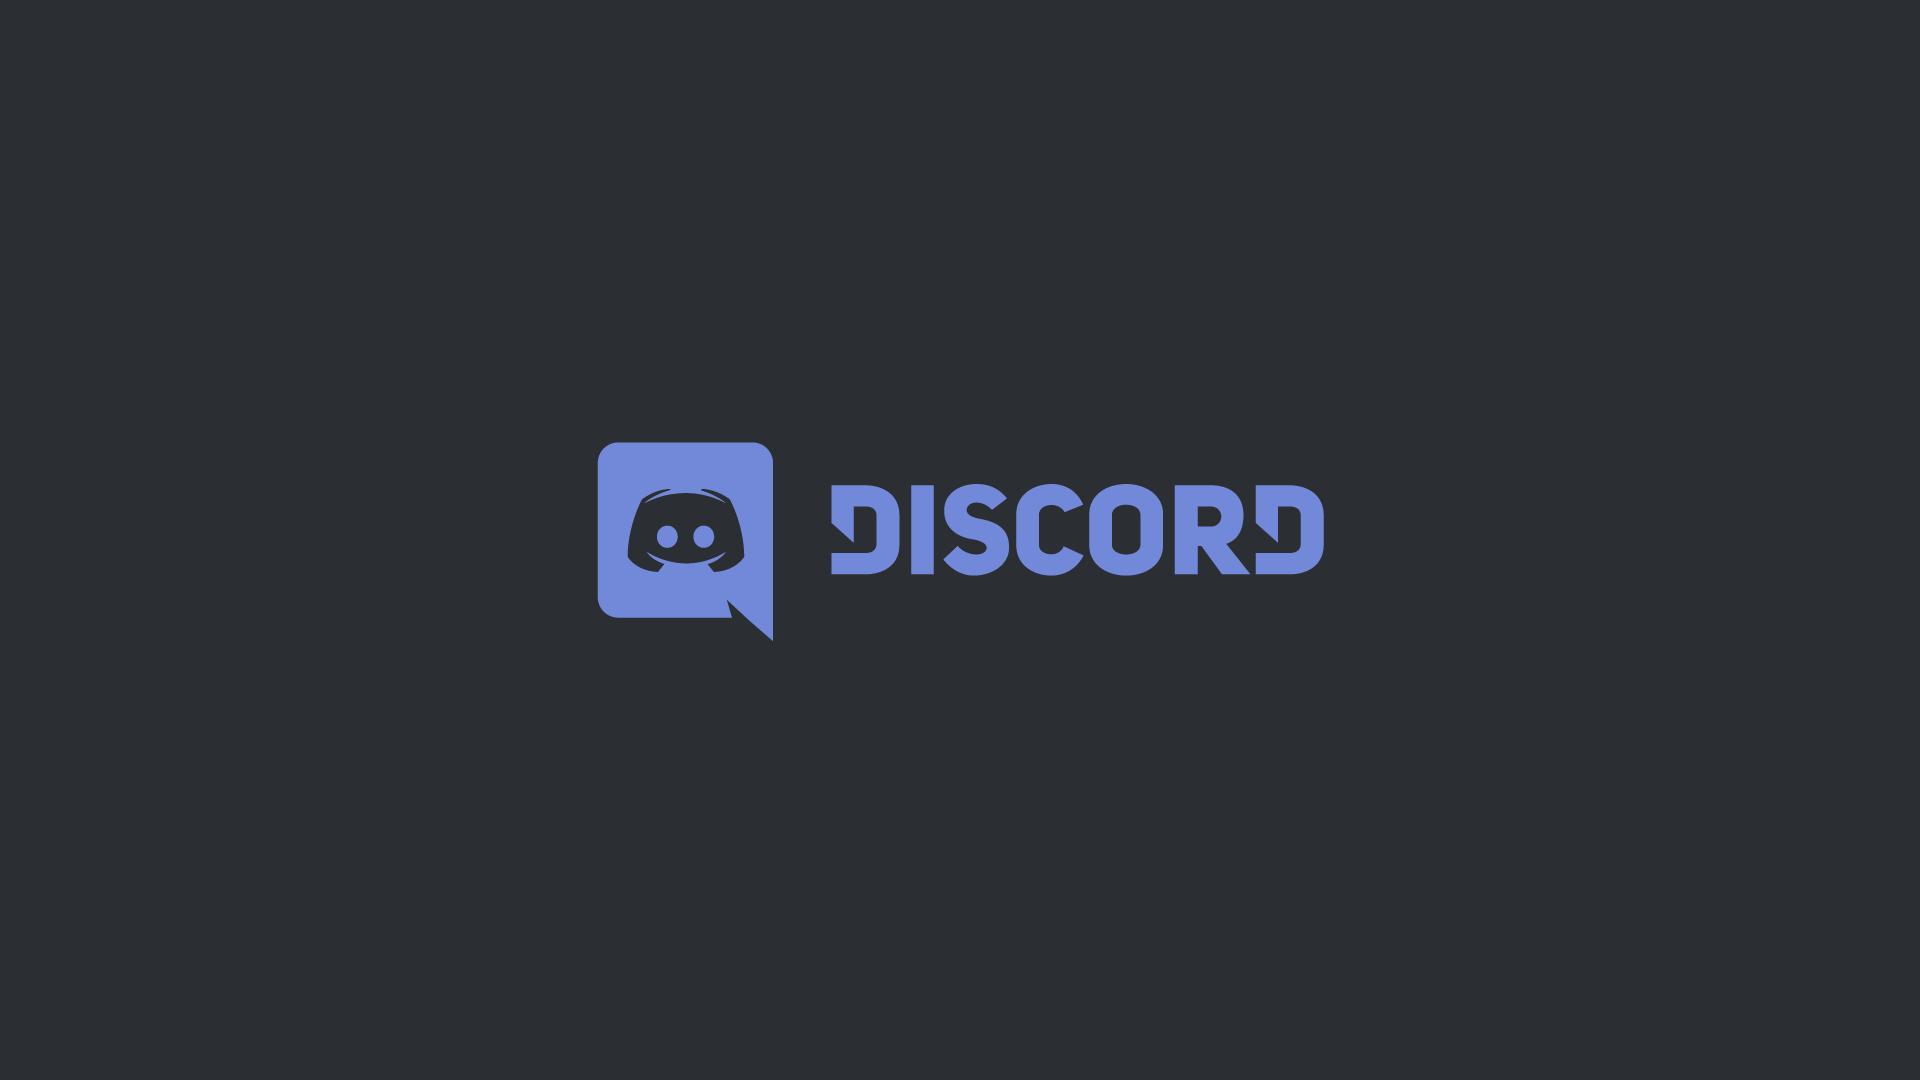 download discord